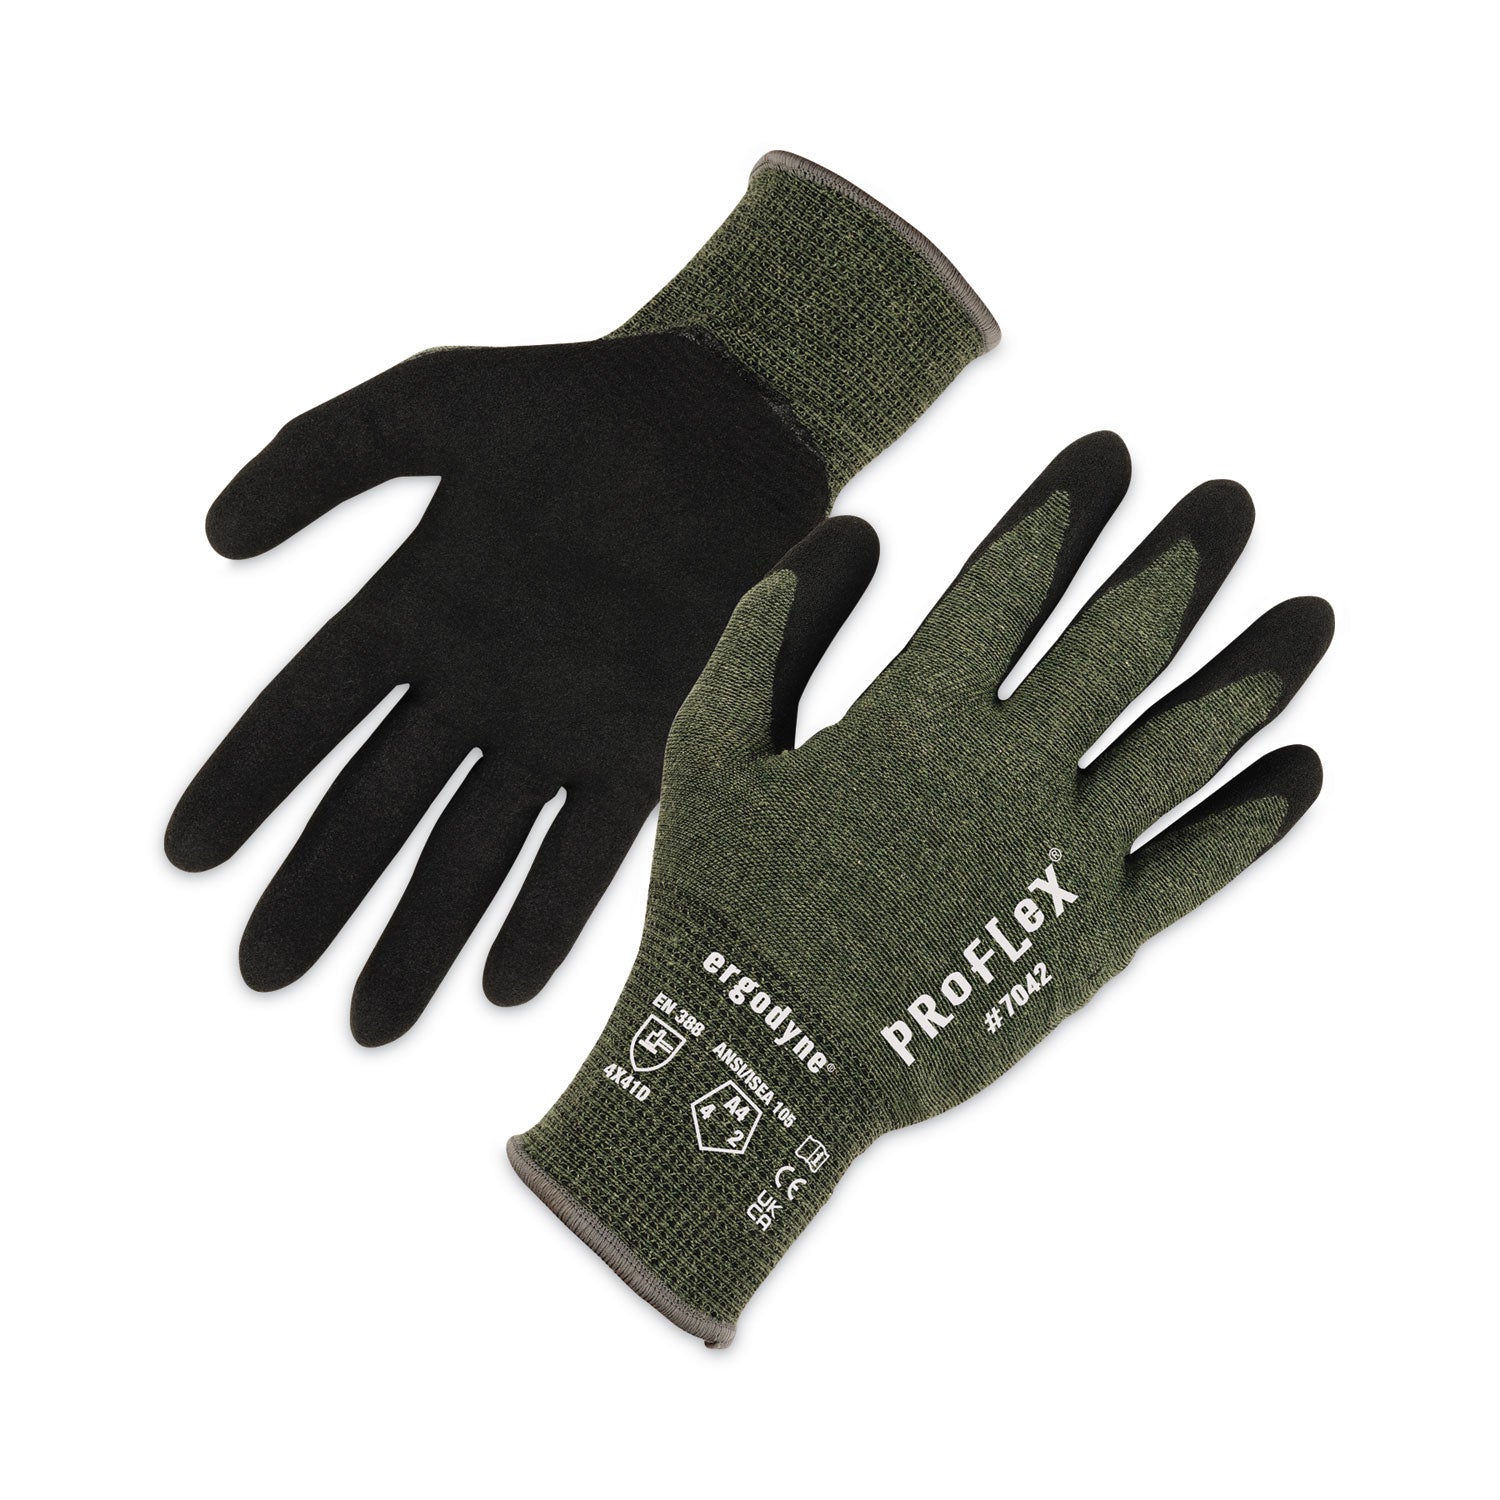 proflex-7042-ansi-a4-nitrile-coated-cr-gloves-green-small-12-pairs-pack-ships-in-1-3-business-days_ego10332 - 1